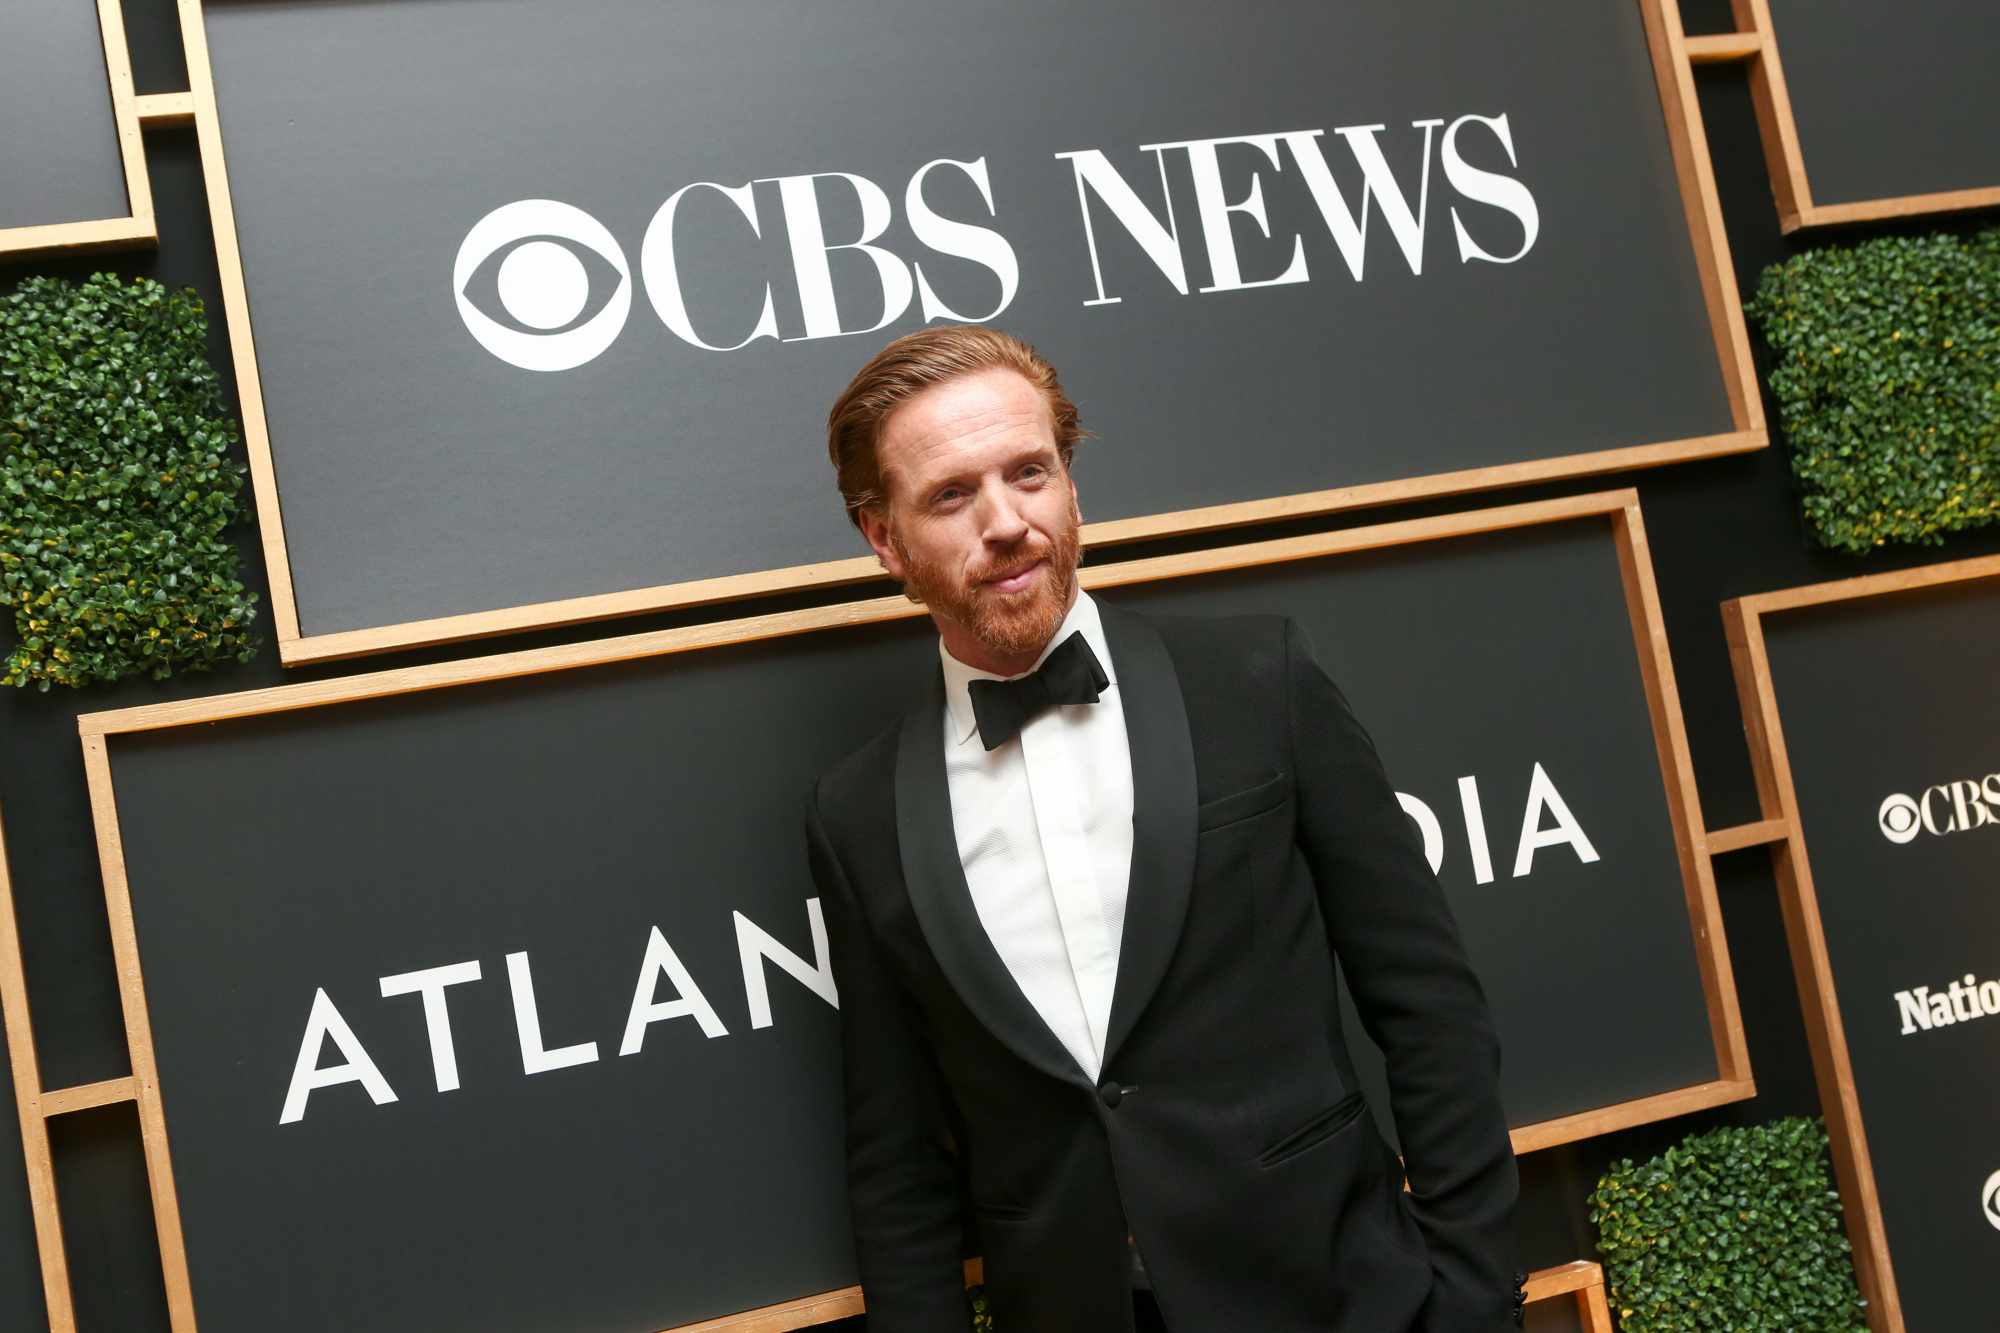 Billions actor Damian Lewis poses in a tuxedo under a CBS News logo